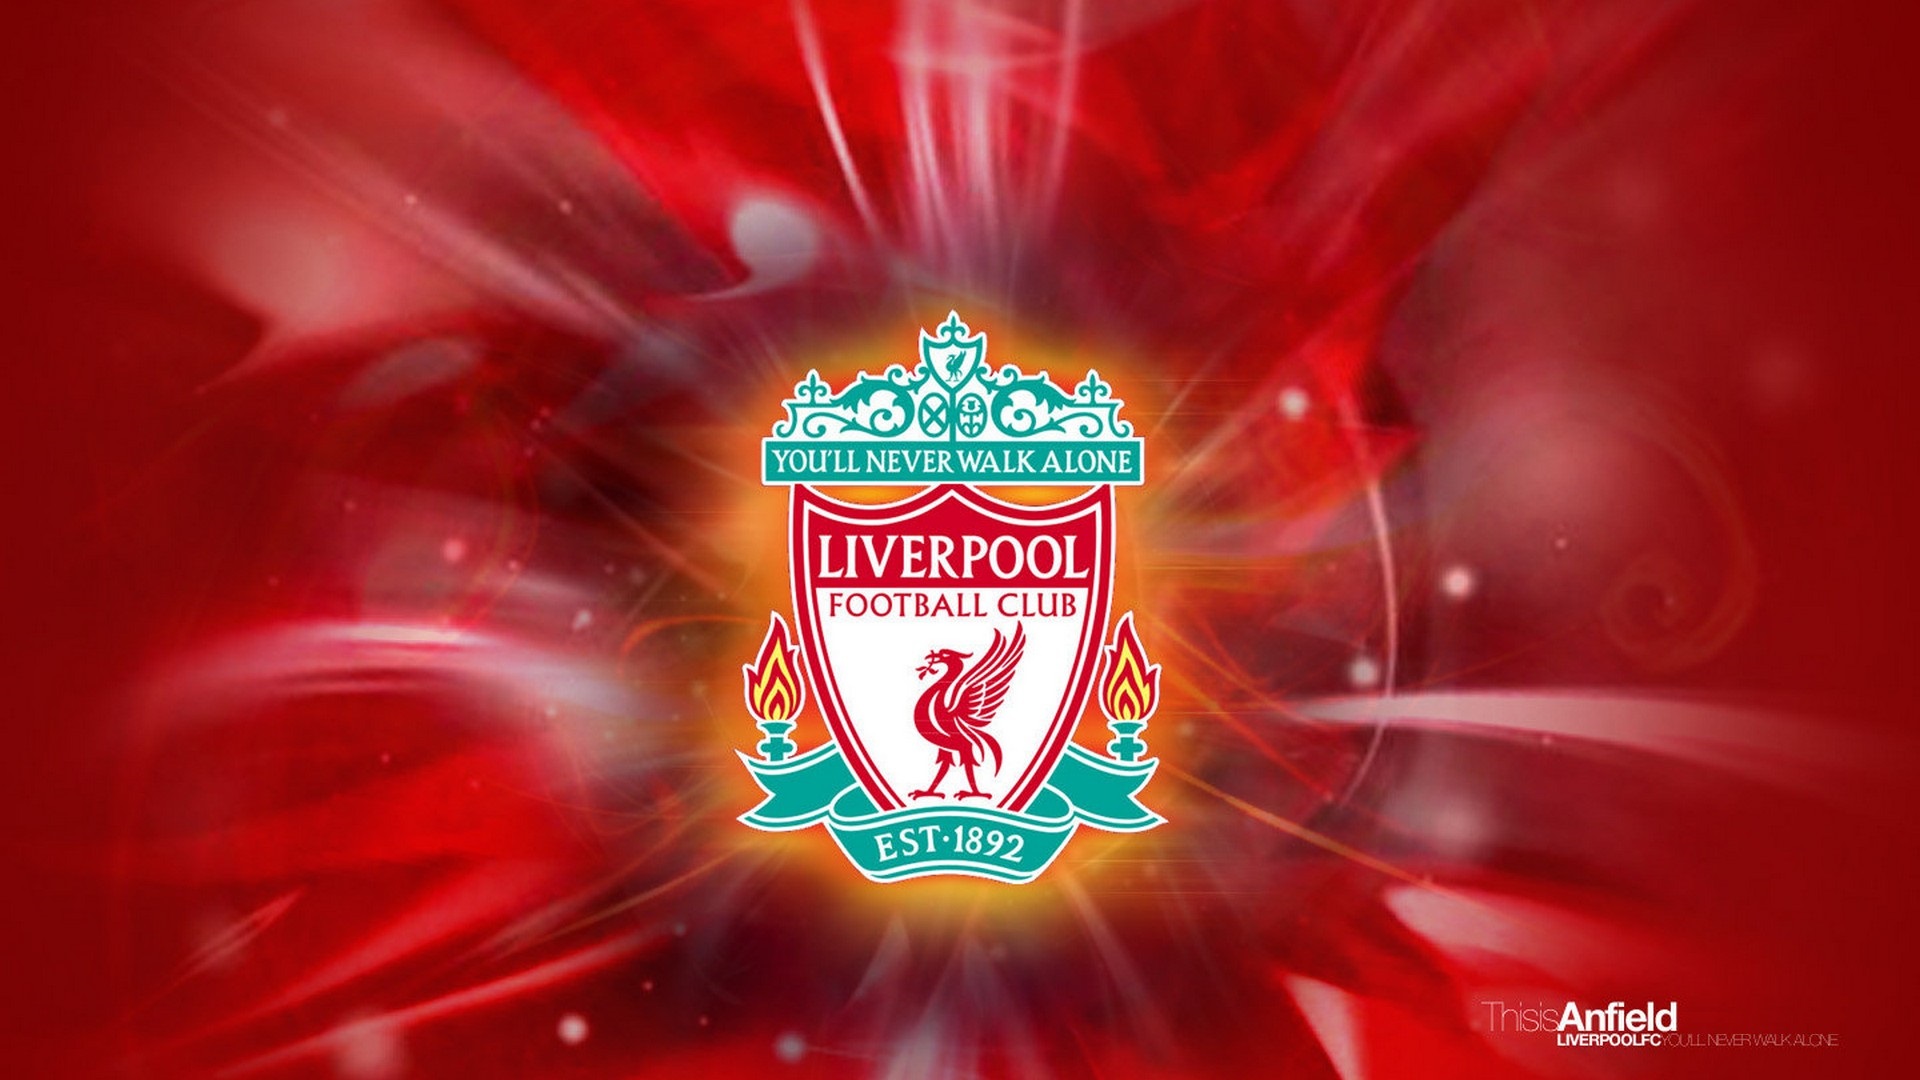 HD Liverpool Backgrounds With Resolution 1920X1080 pixel. You can make this wallpaper for your Mac or Windows Desktop Background, iPhone, Android or Tablet and another Smartphone device for free